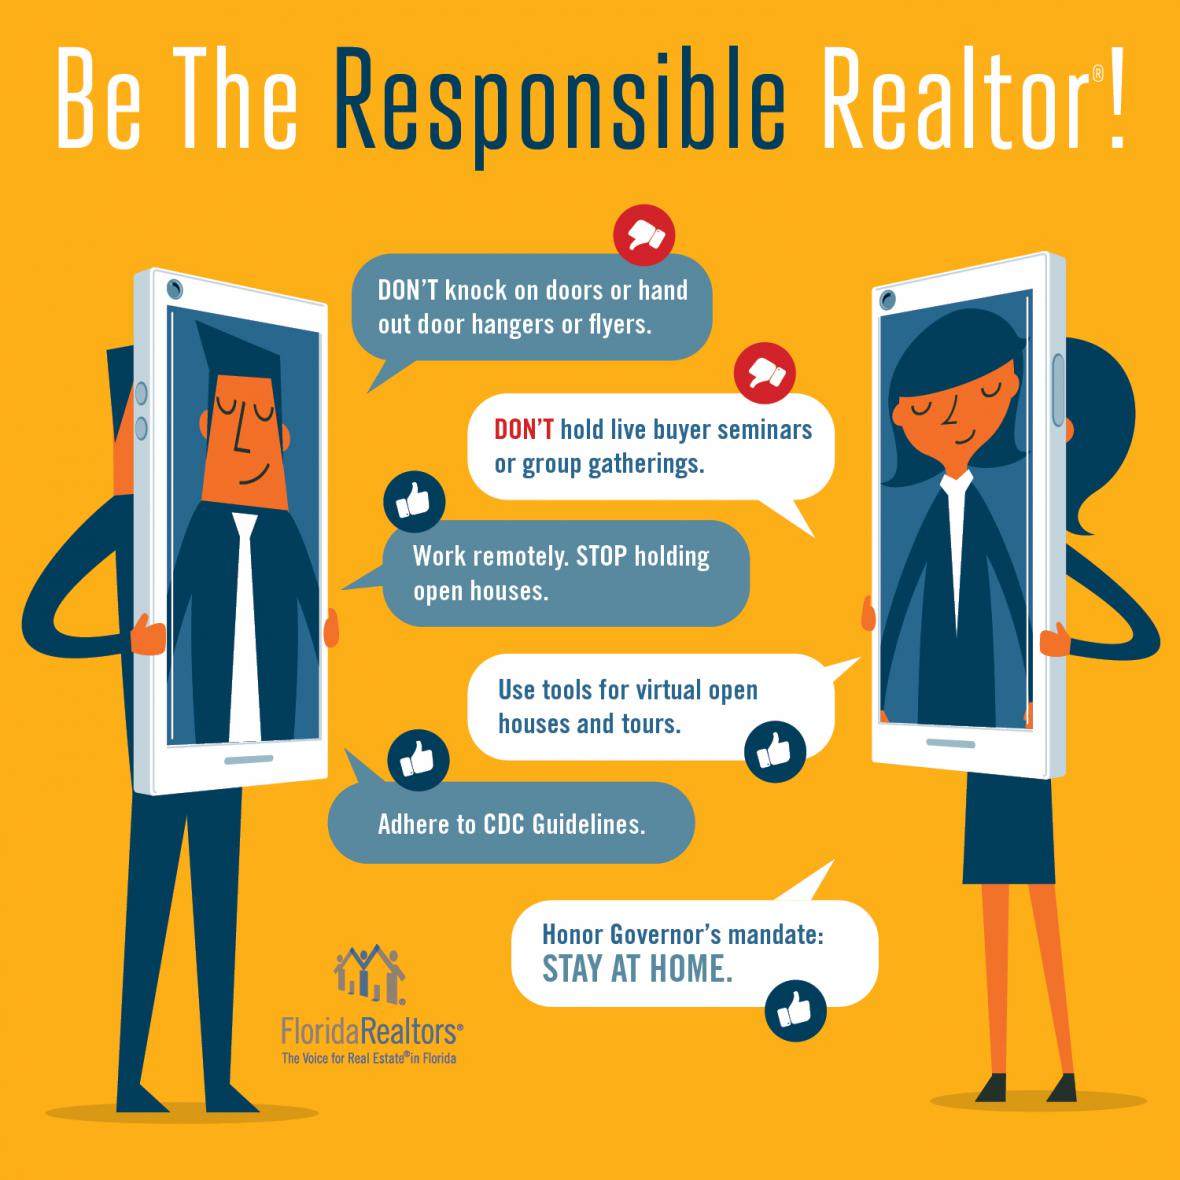 Be the responsible Realtor infographic